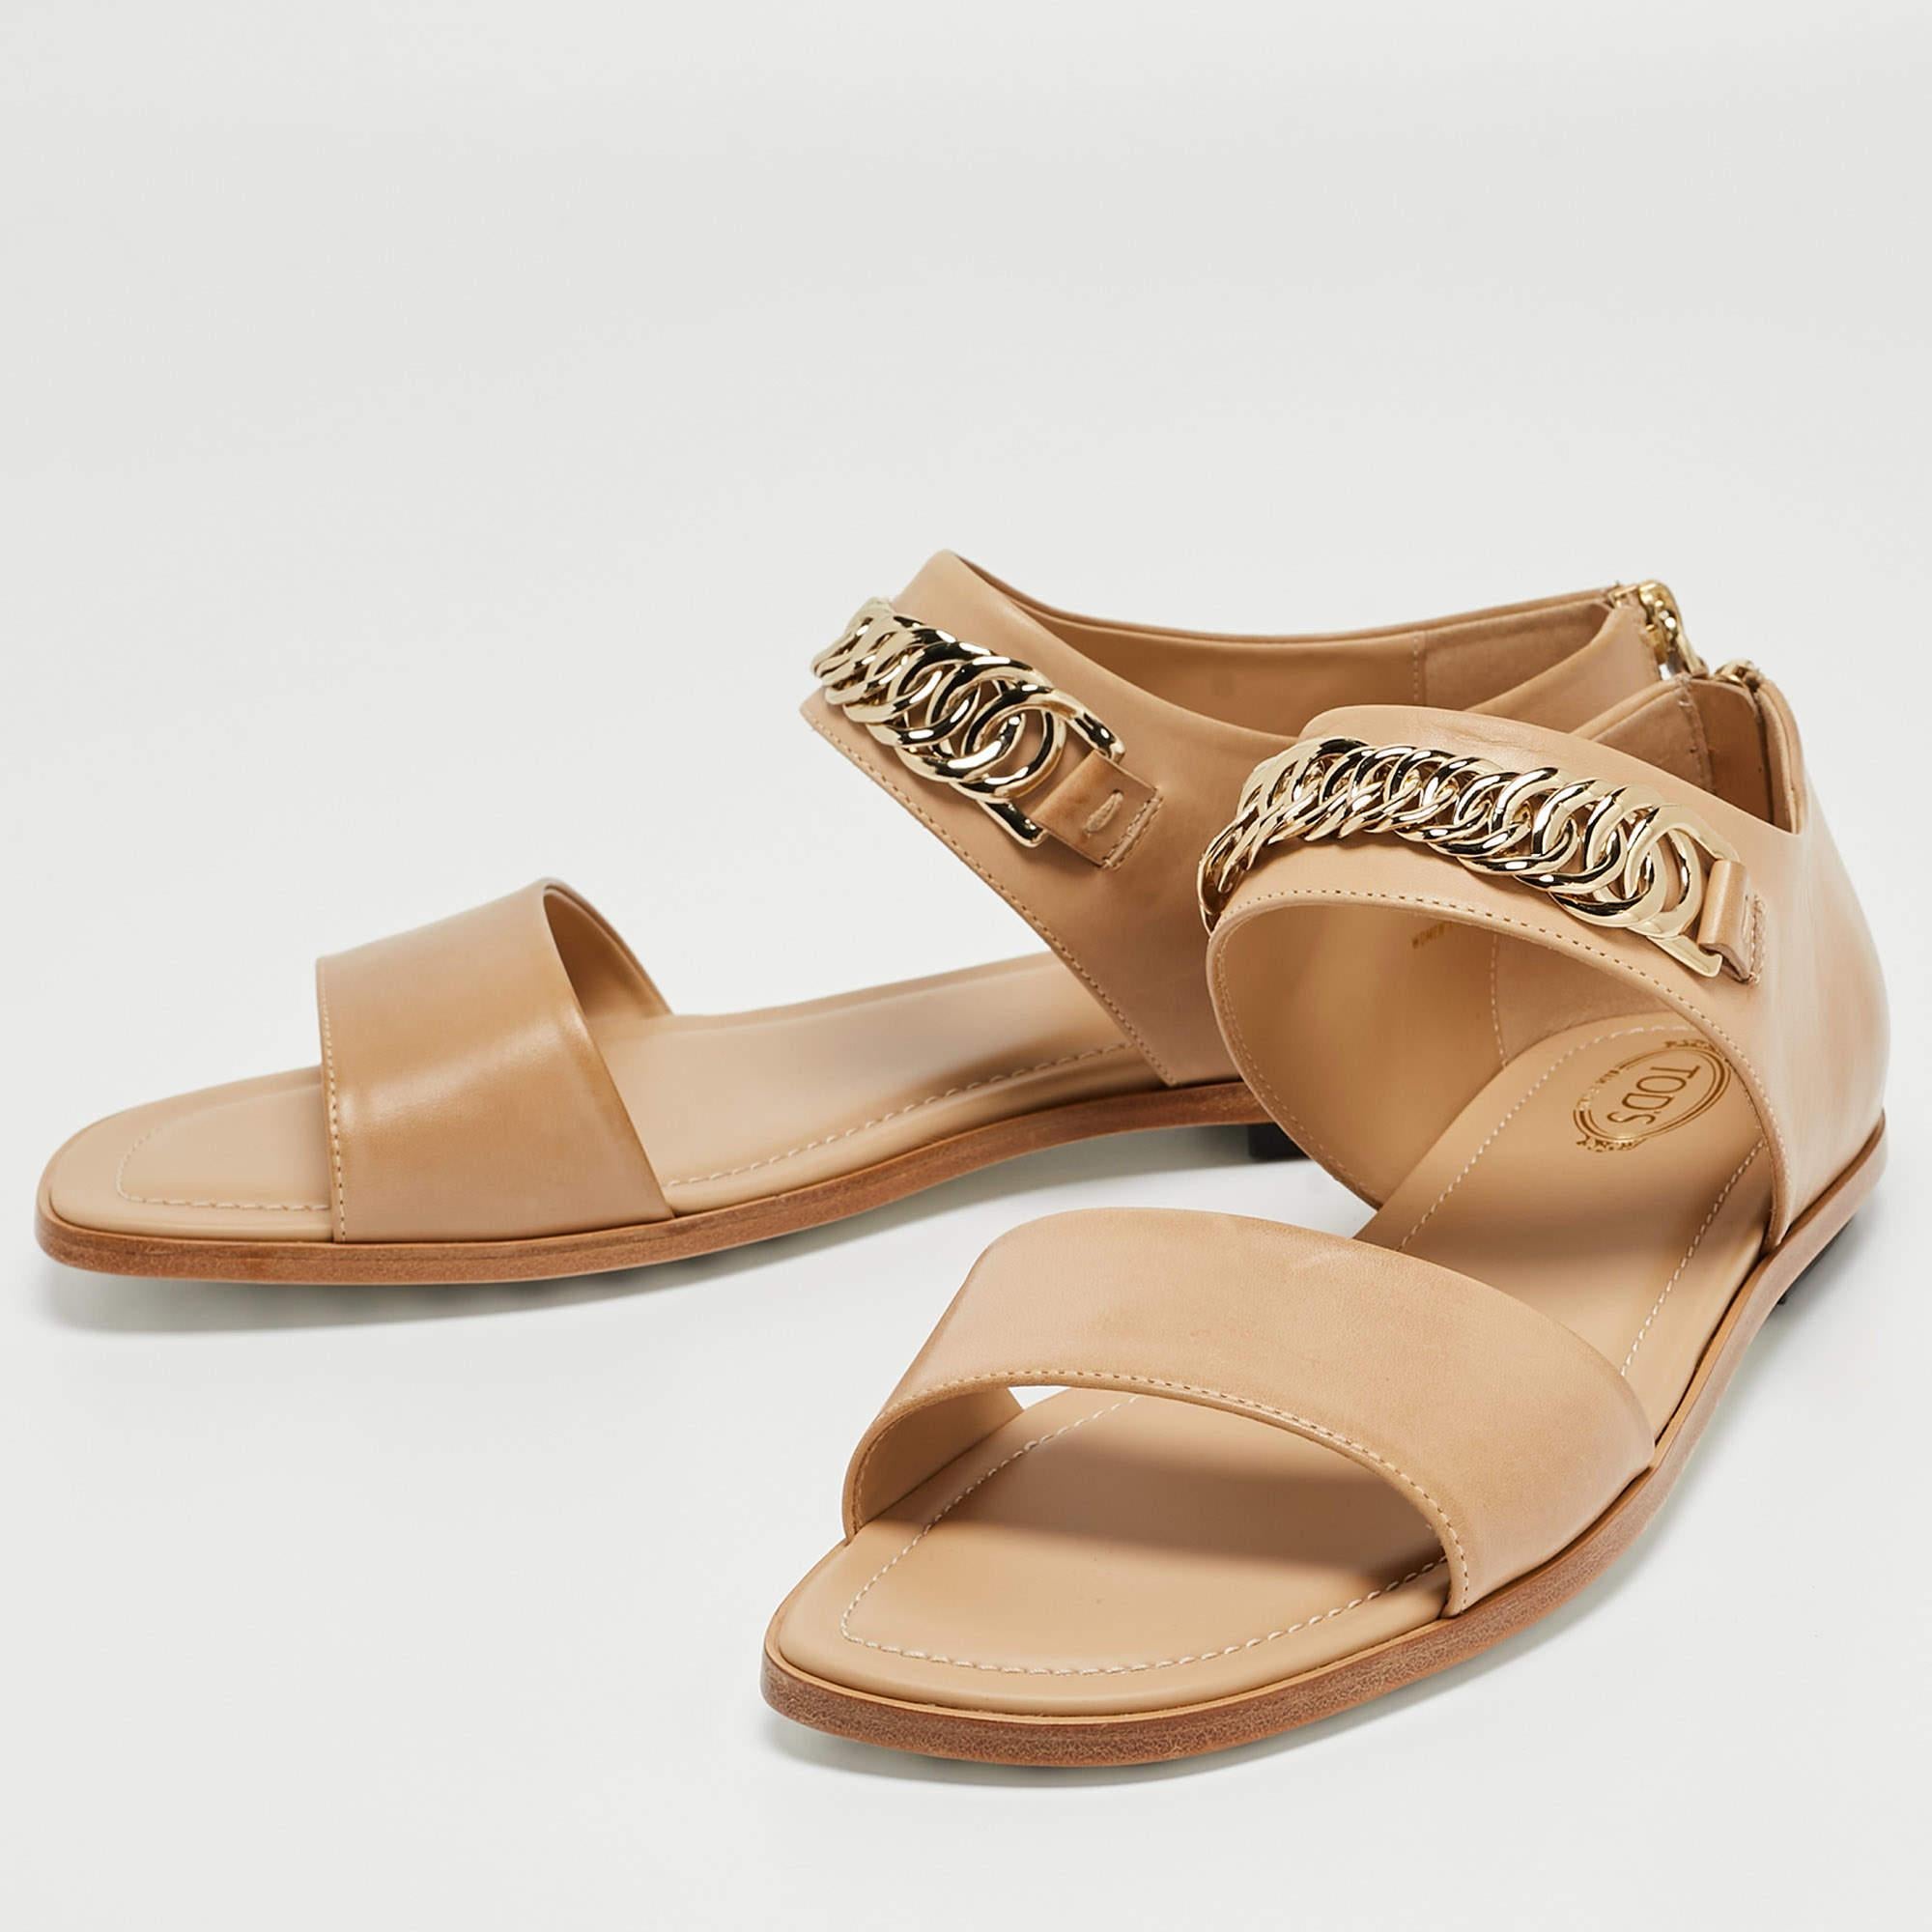 Frame your feet with these Tod's flat sandals. Created using the best materials, the flats are perfect with short, midi, and maxi hemlines.

Includes: Original Dustbag, Original Box